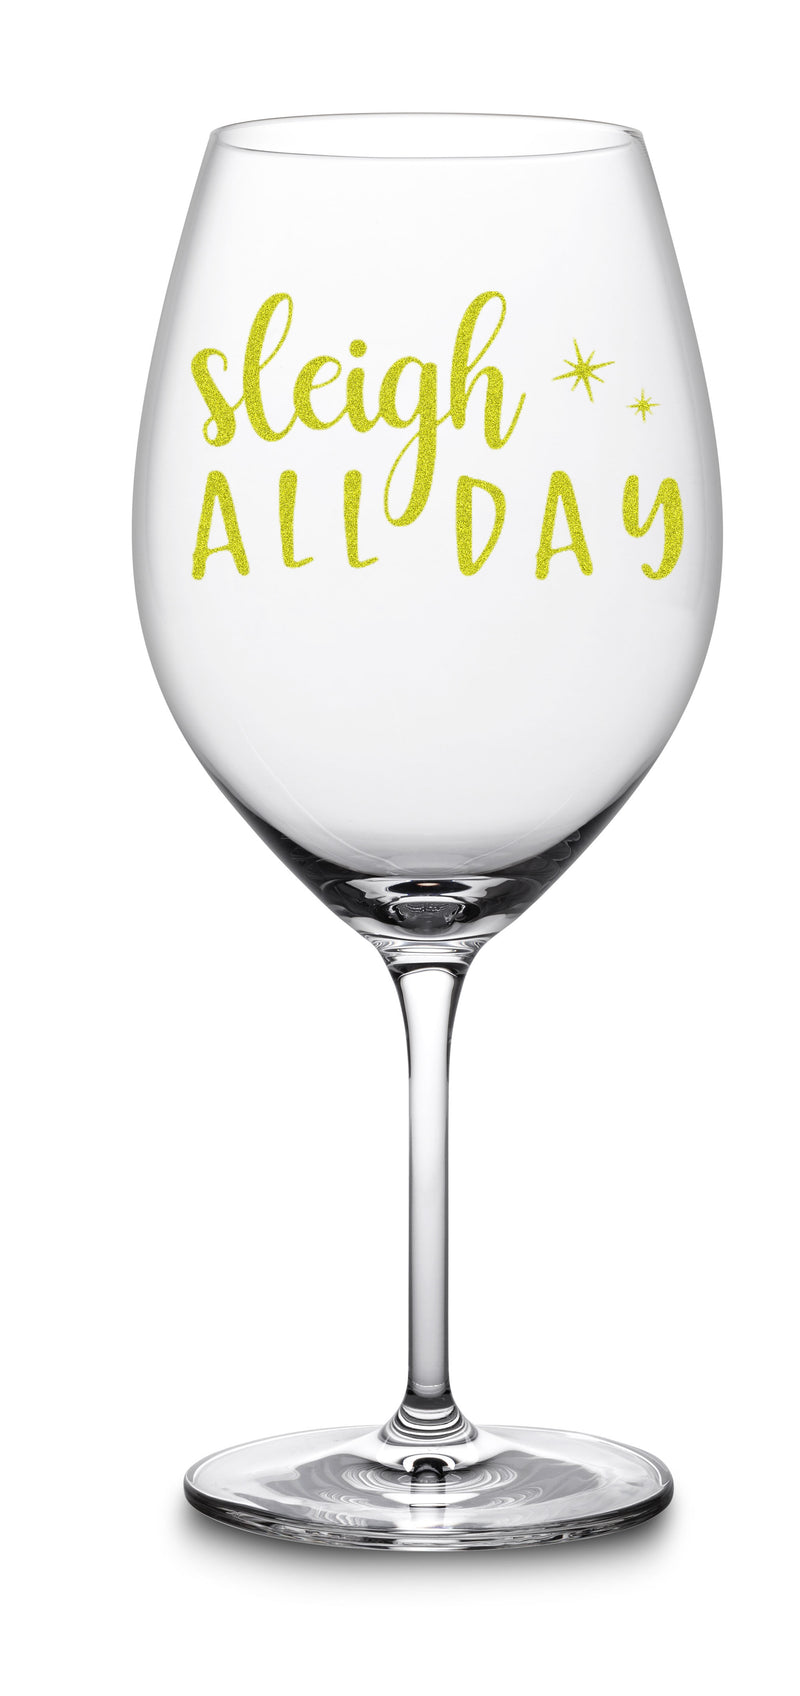 Sleigh All Day Christmas Wine Glass Gift Cute Funny Sayings – Test